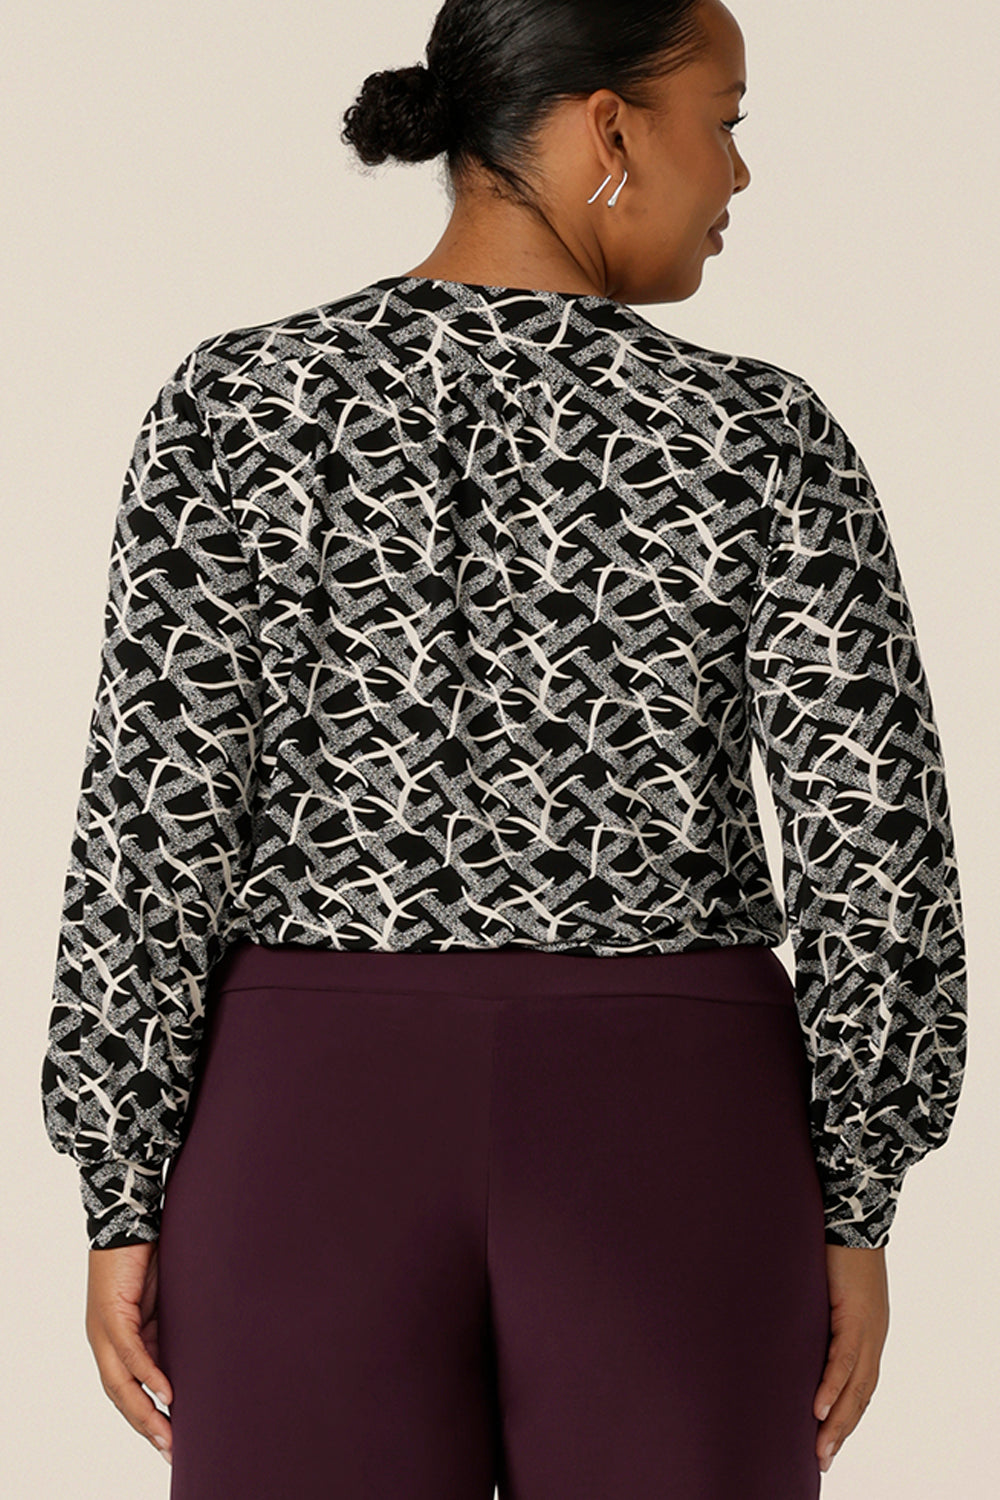 Back view of a size 18, plus size woman wears a long sleeve top with bishop sleeve cuffs and a scoop neck in black and white print jersey. Made in Australia by Australian and New Zealand women's clothing brand, L&F this women's work top is available to shop in sizes 8 to 24.